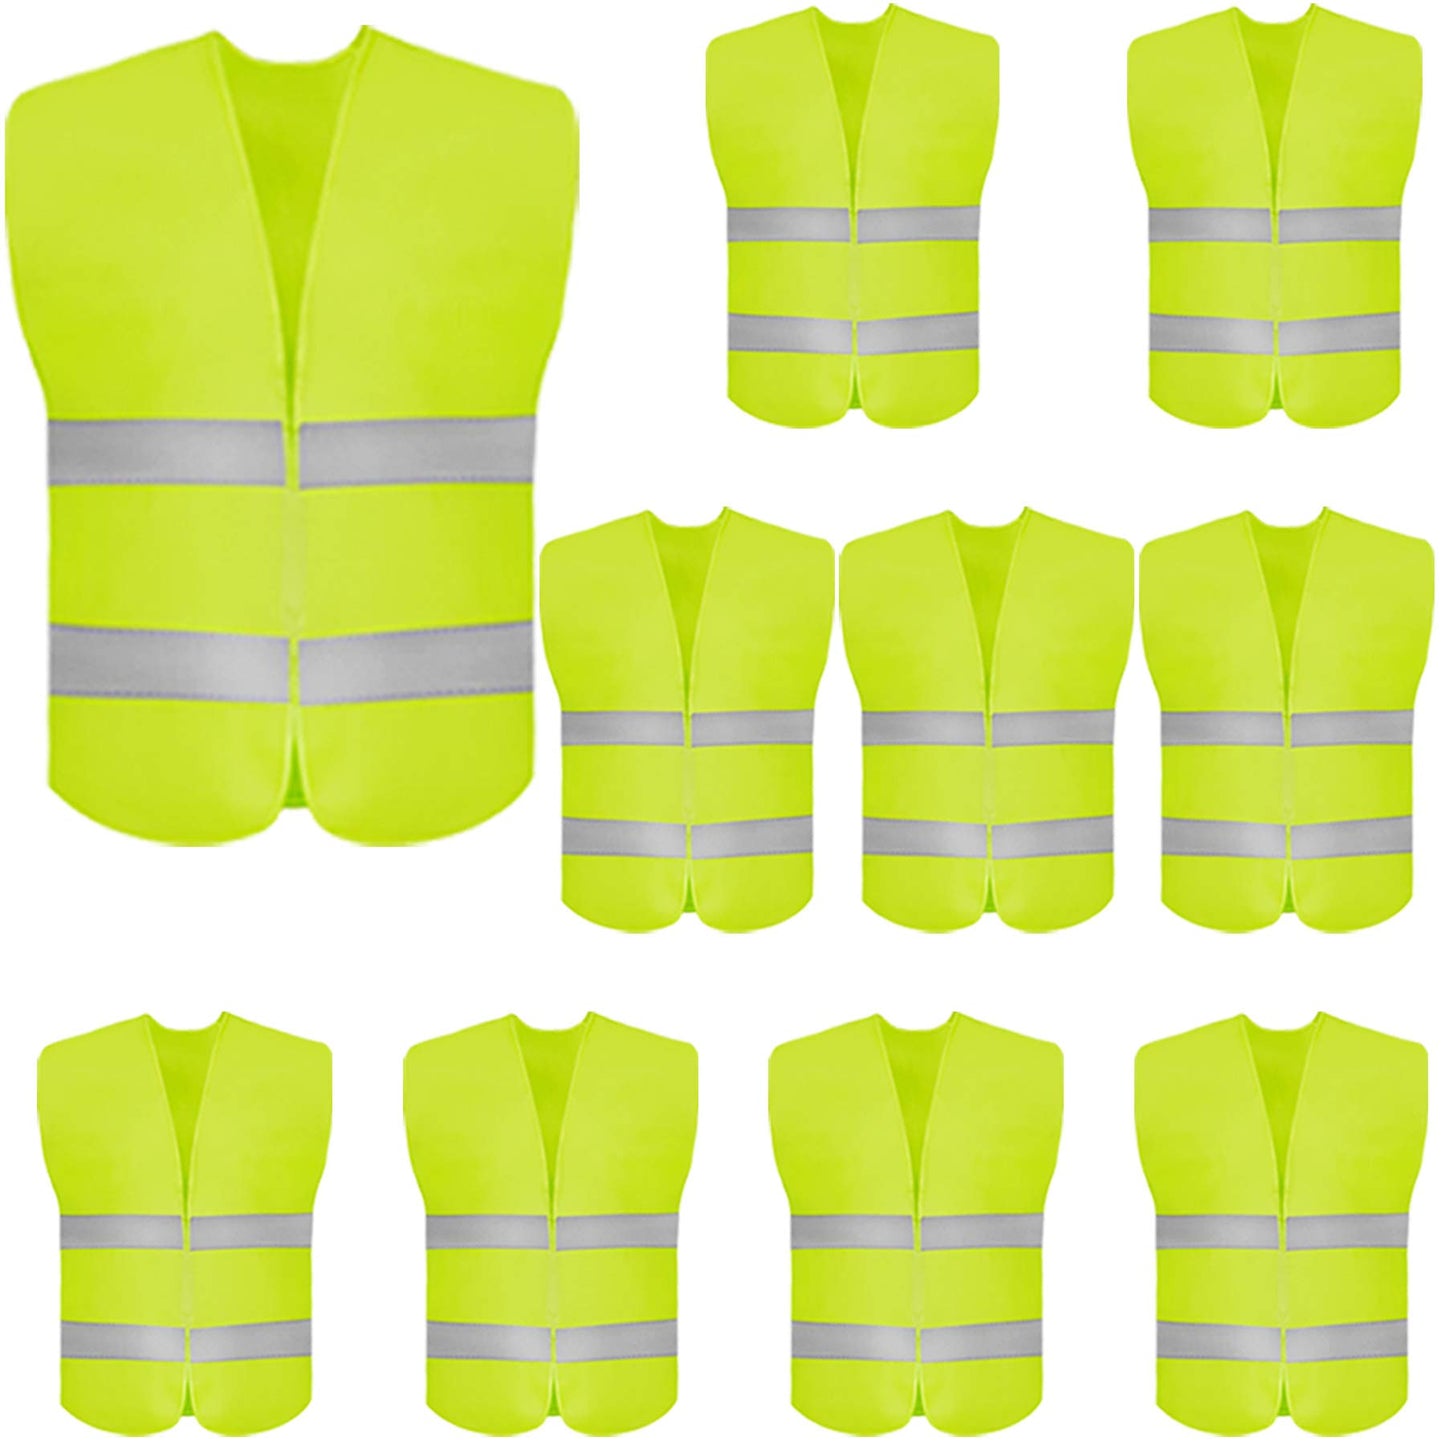 10 Pack High Visibility Safety Vest for Traffic Work, Running, Surveyor and Security Guard - Construction Vest with 2 Reflective Strips, Made from Breathable and Neon Yellow Mesh Fabric